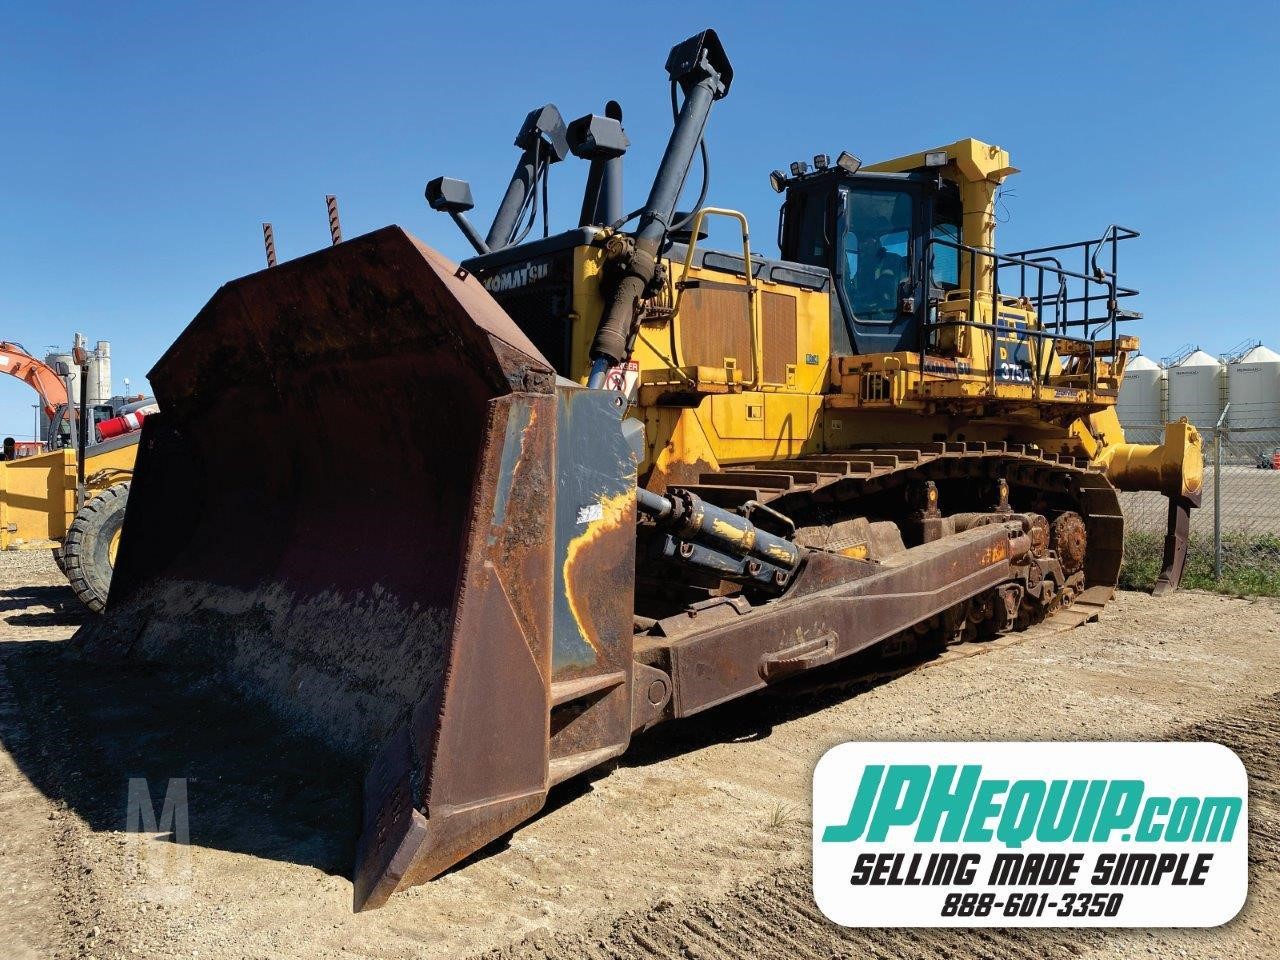 KOMATSU D375 For Sale - 38 Listings | MarketBook.ca - Page 1 of 2